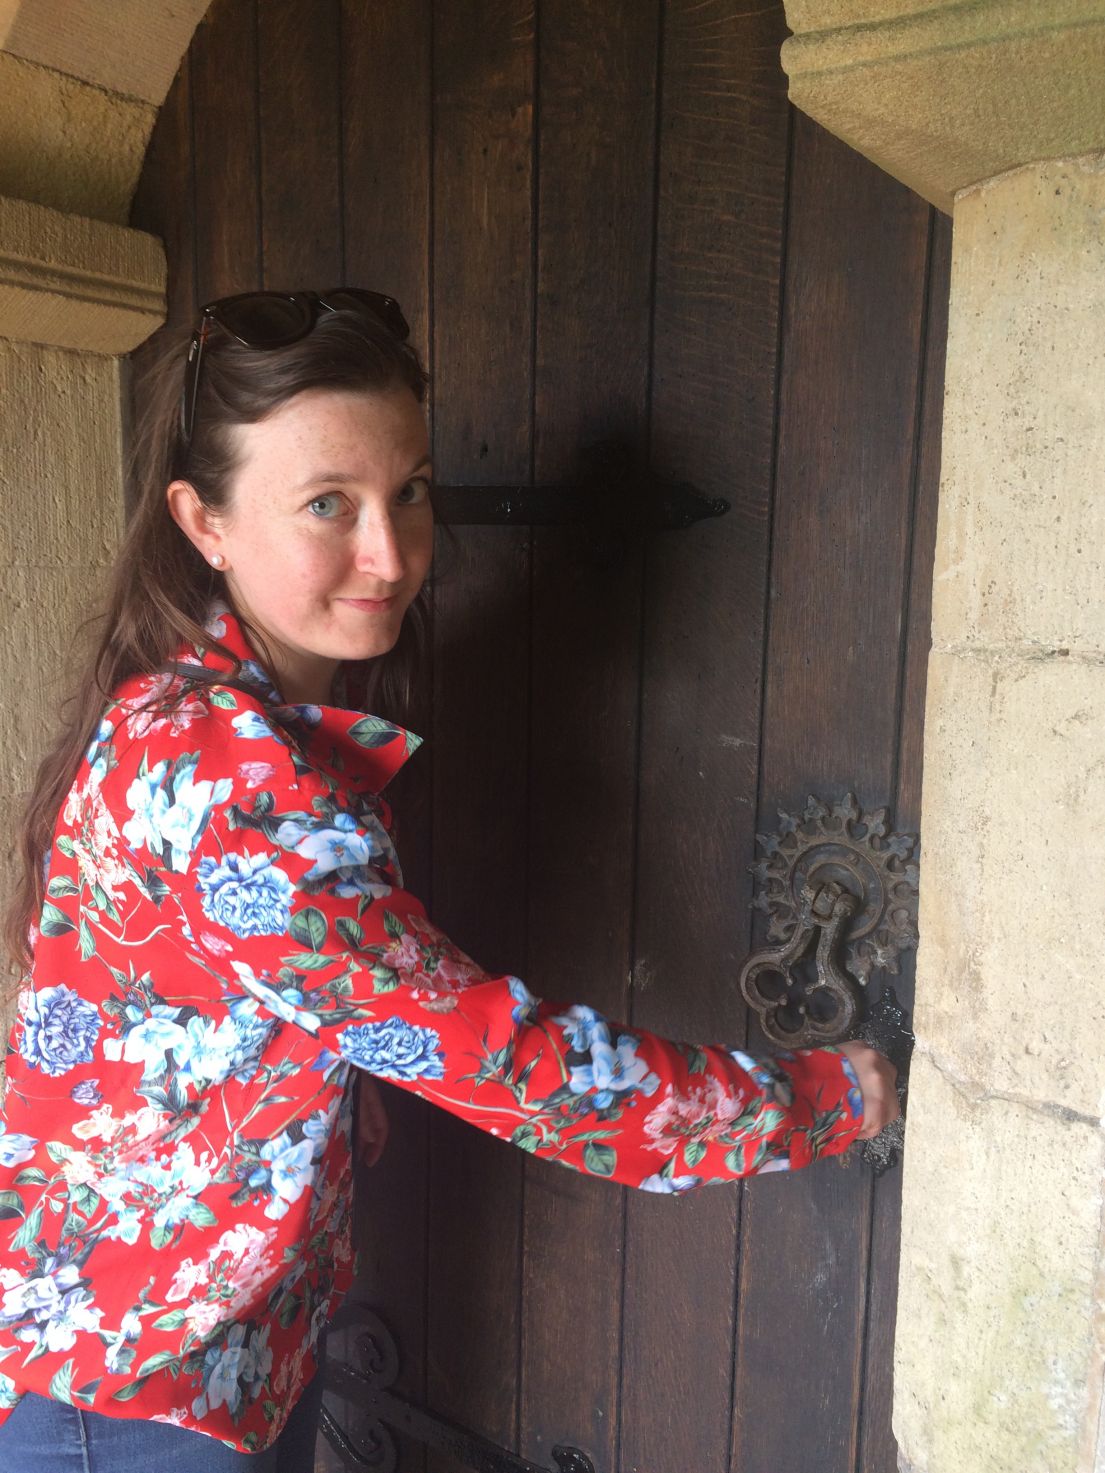 A women with brown long hair in a red patterned shirt is opening an old wooden door.